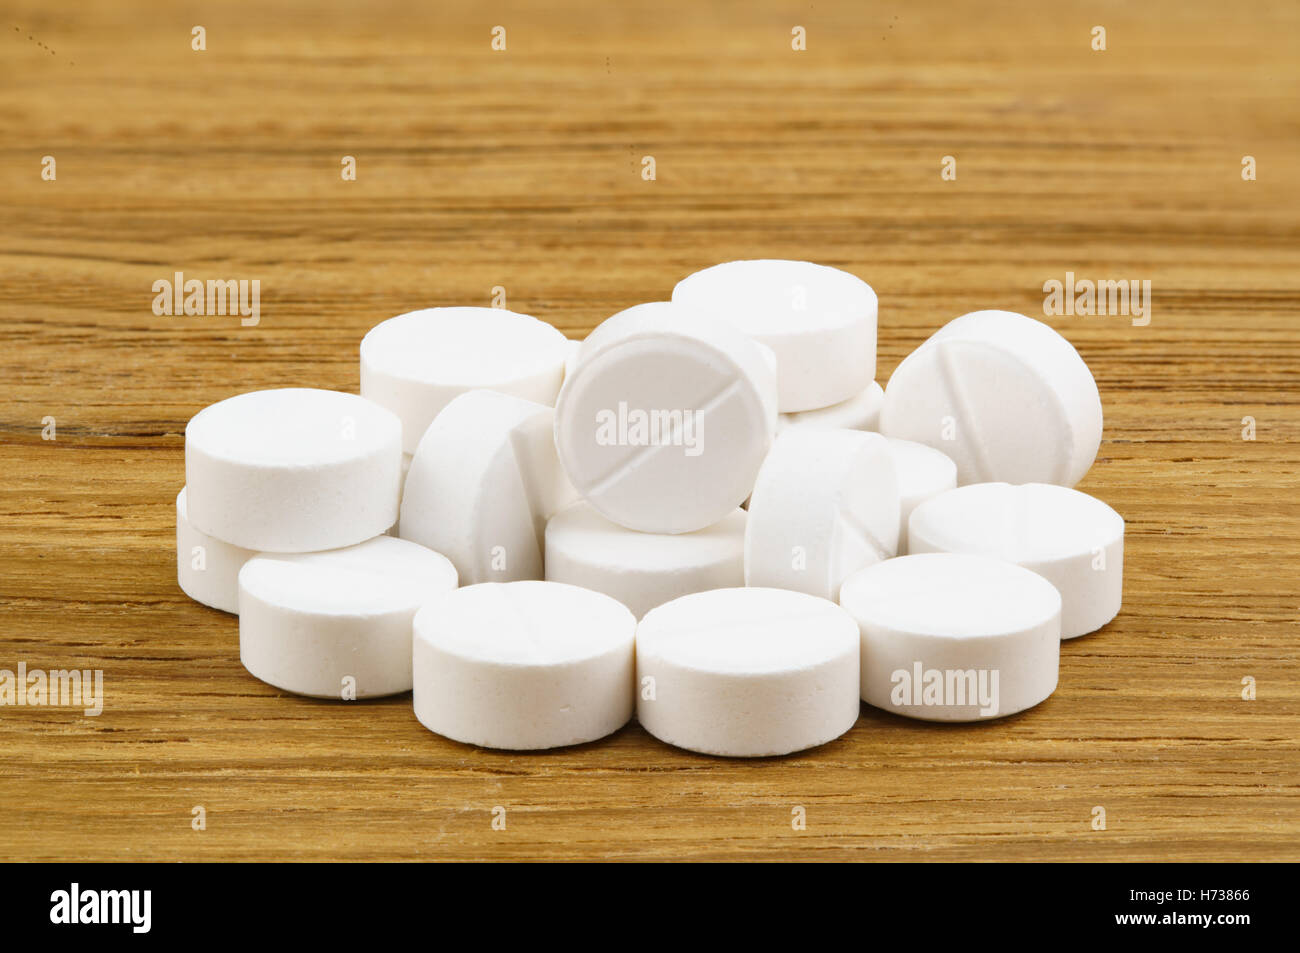 Pile of white pills of medicine on wood background Stock Photo